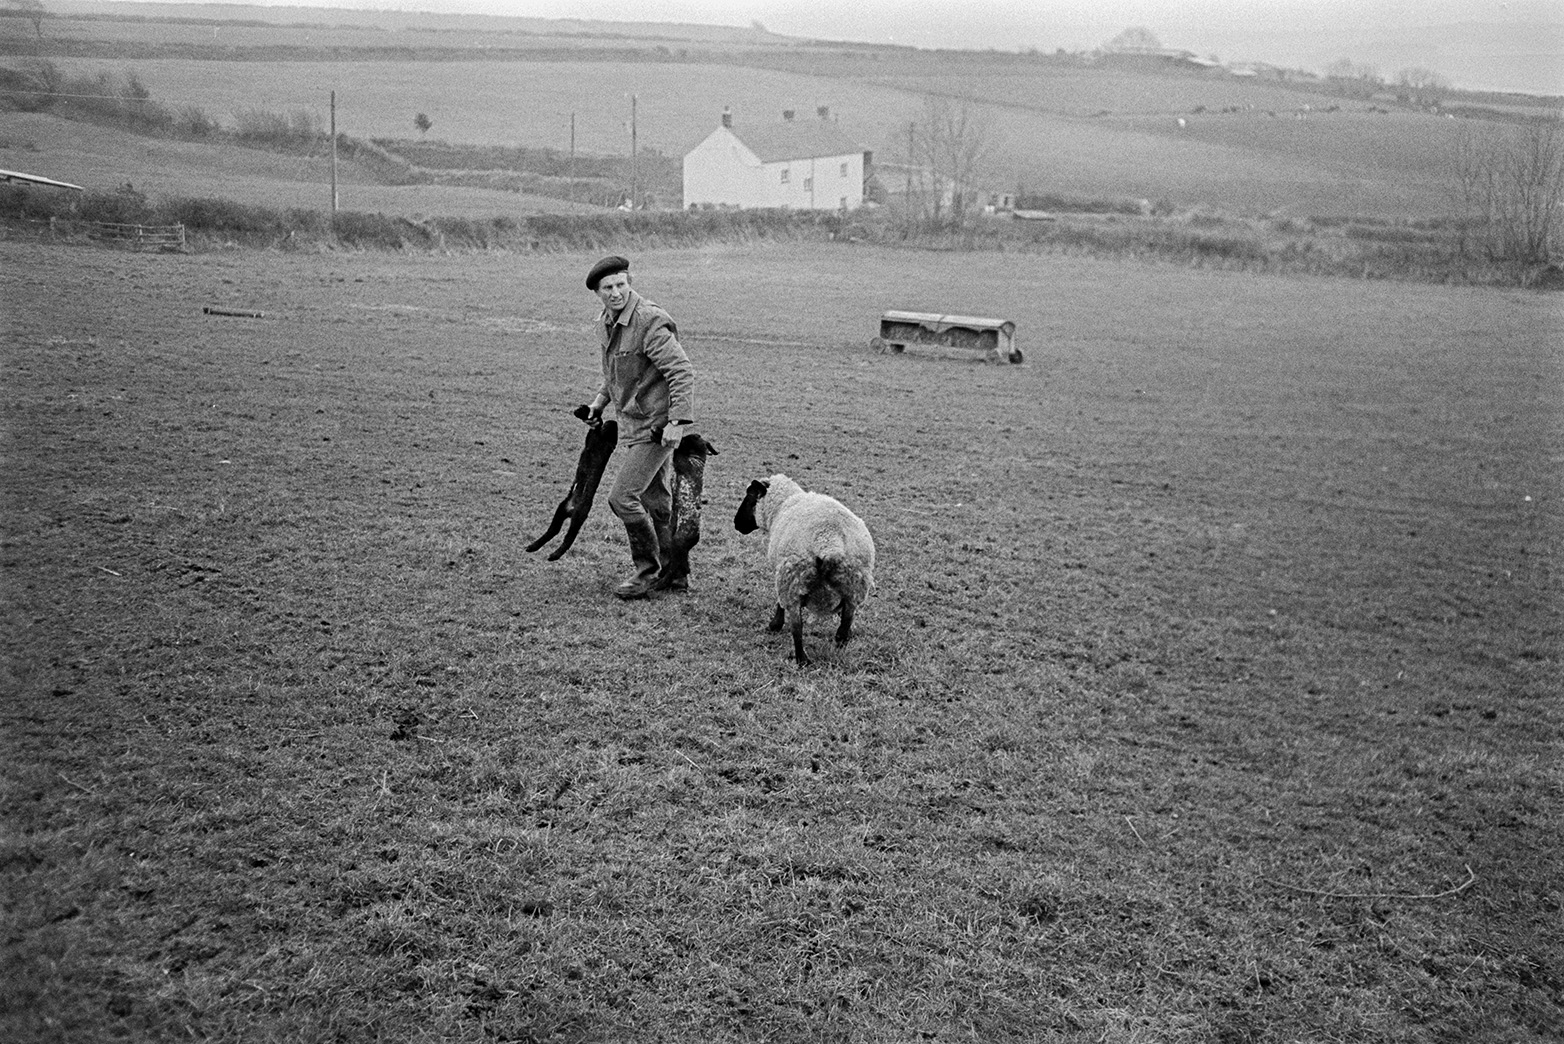 Ivor Bourne carrying two new born lambs across a field at Mill Road Farm, Beaford with a ewe following him. A hay rack can be seen in the field and a farmhouse is visible in the background. The farm was also known as Jeffrys.